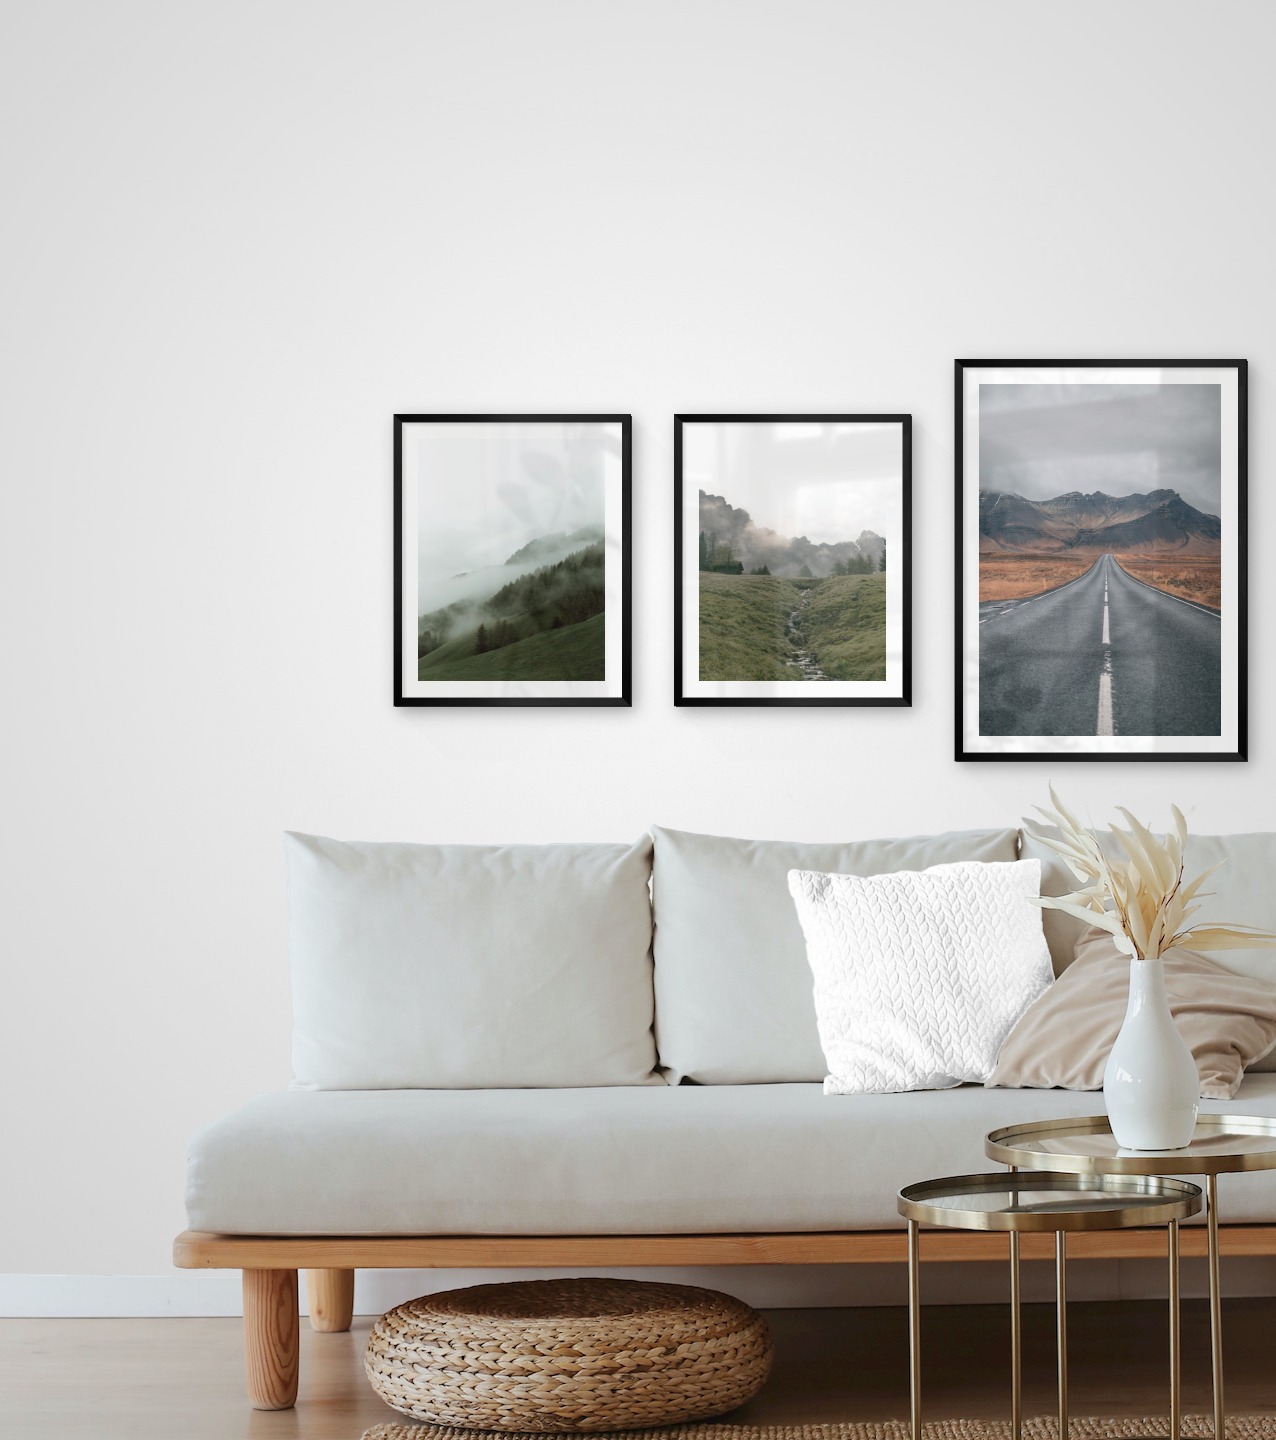 Gallery wall with picture frames in black in sizes 40x50 and 50x70 with prints "Foggy slope", "Green valley in front of mountains" and "Road and mountains"